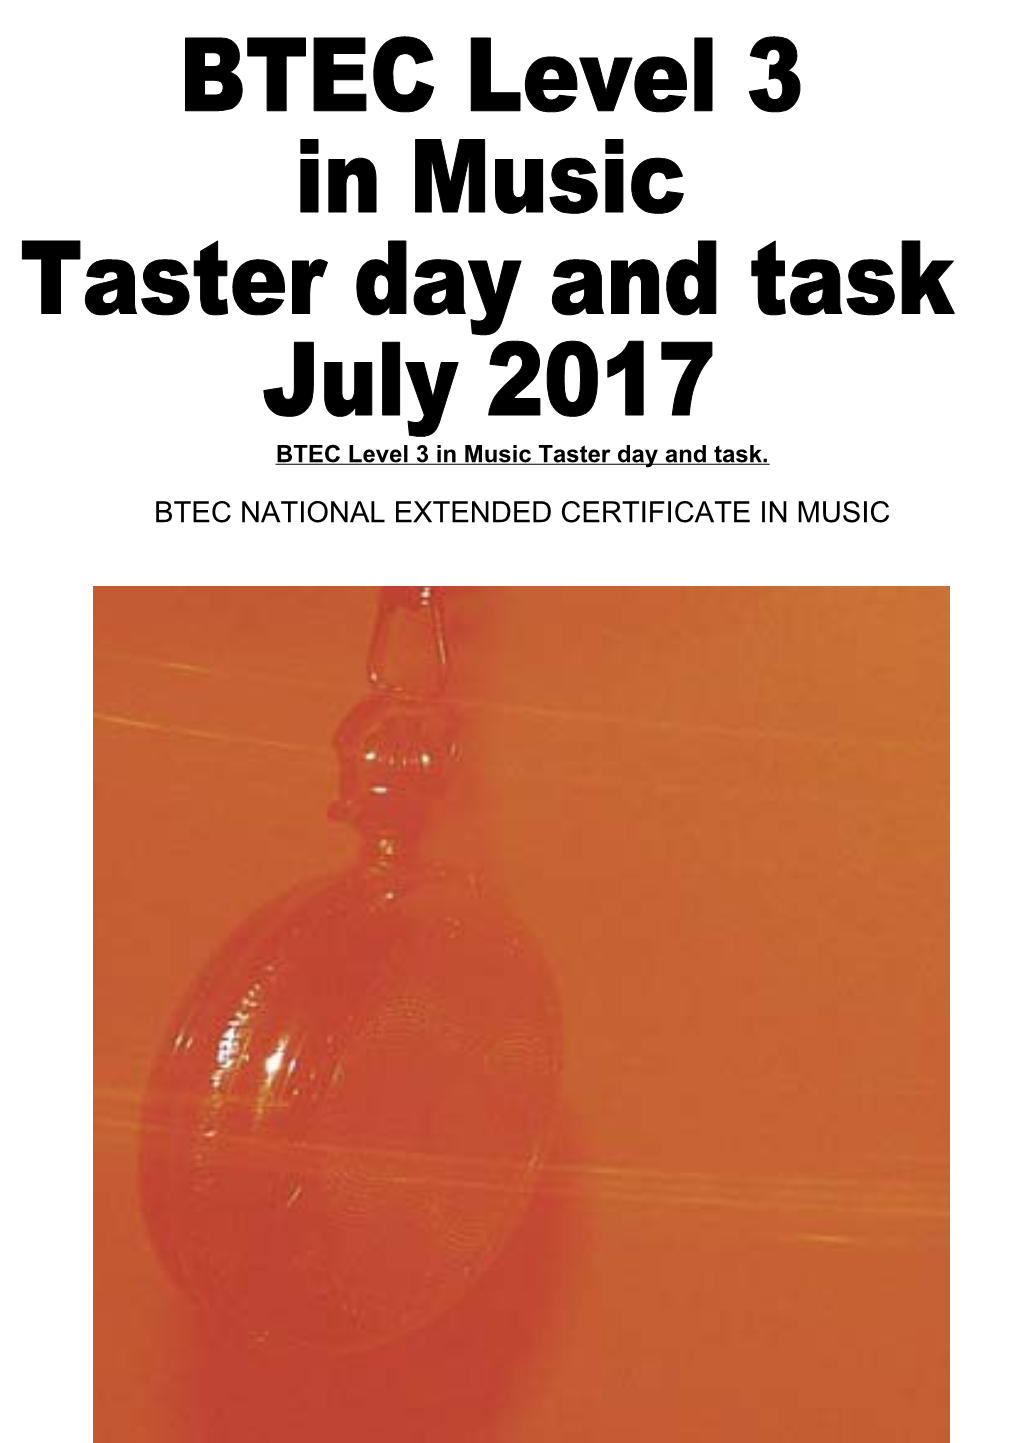 BTEC Level 3 in Music Taster Day and Task